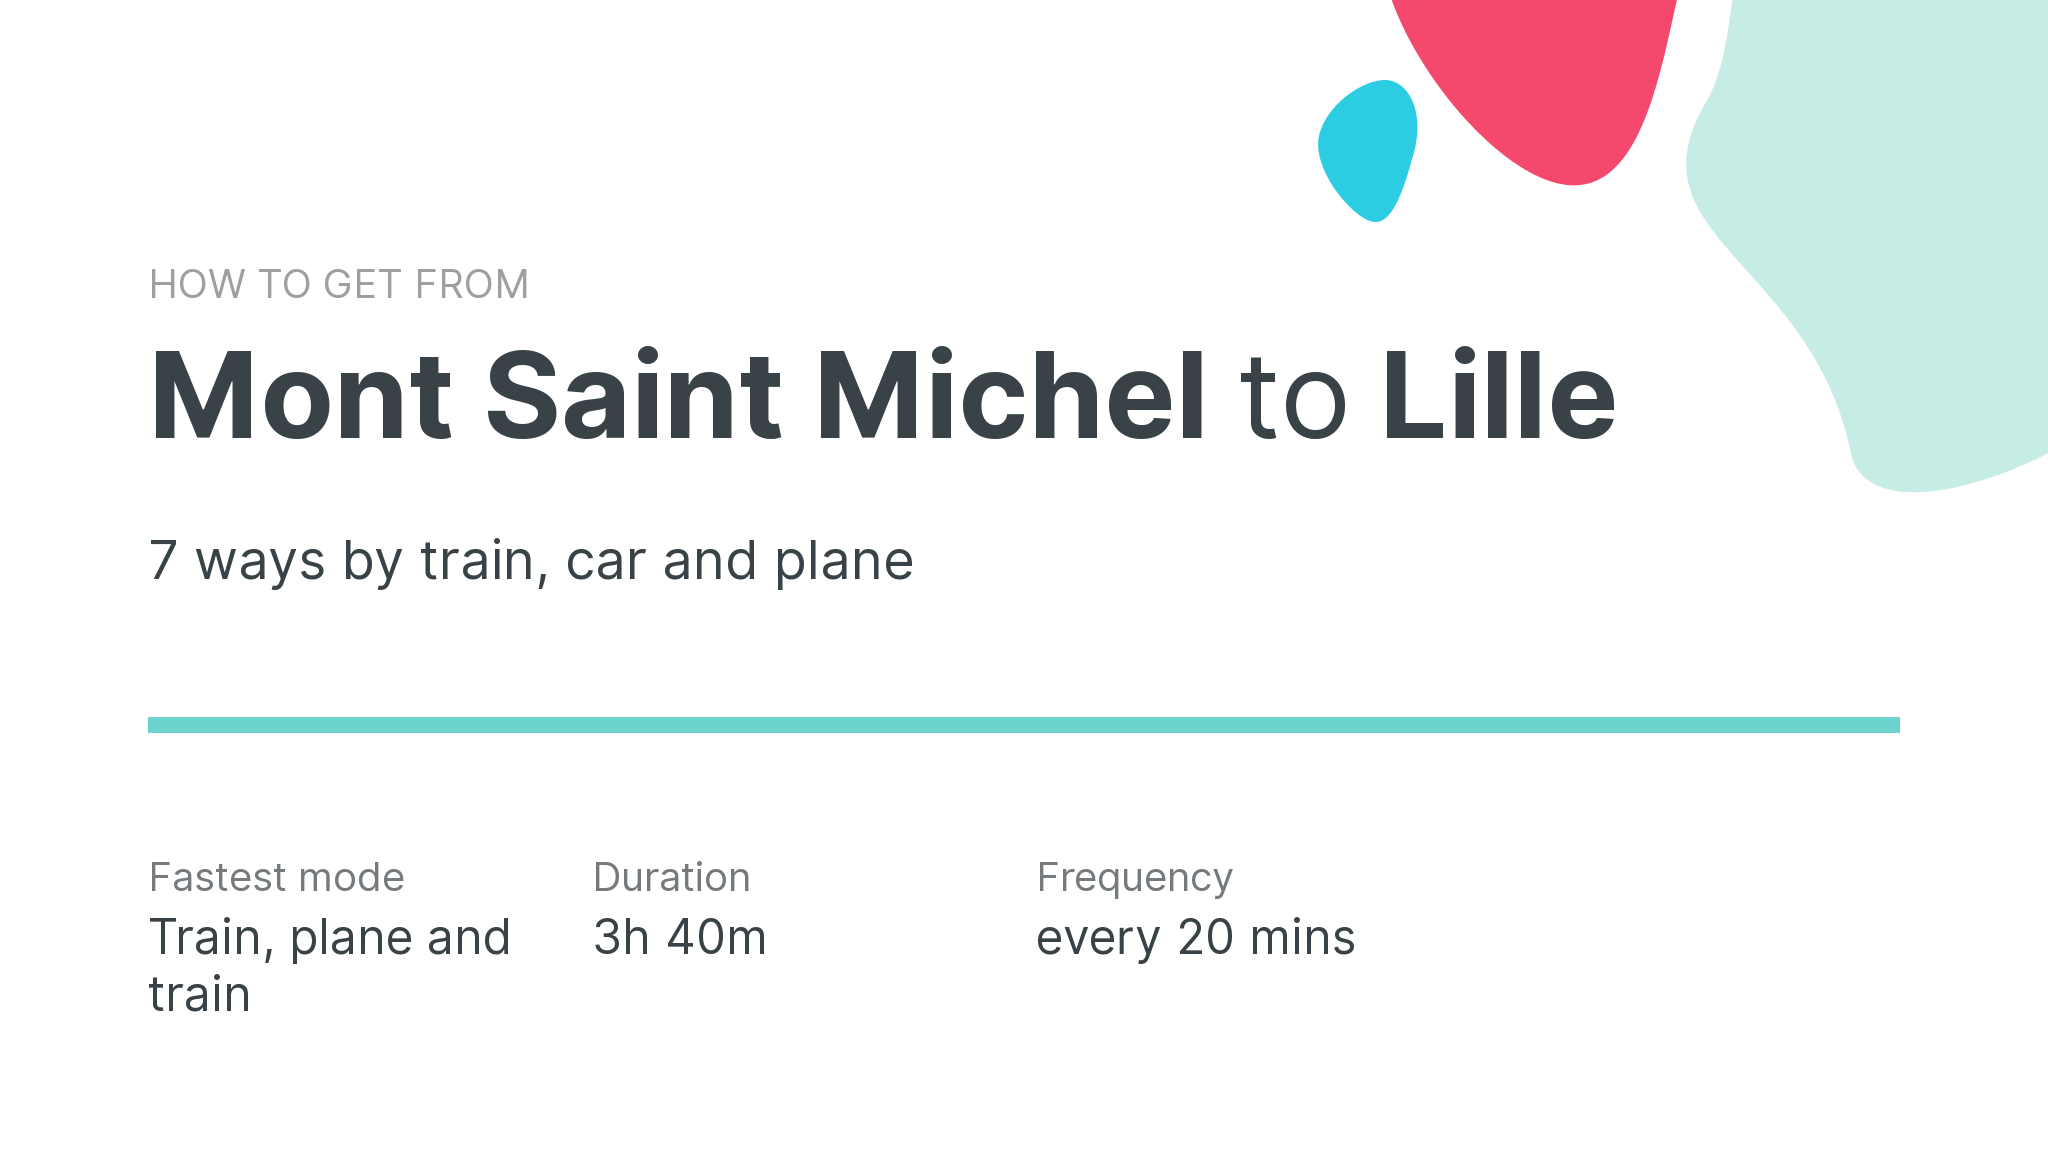 How do I get from Mont Saint Michel to Lille